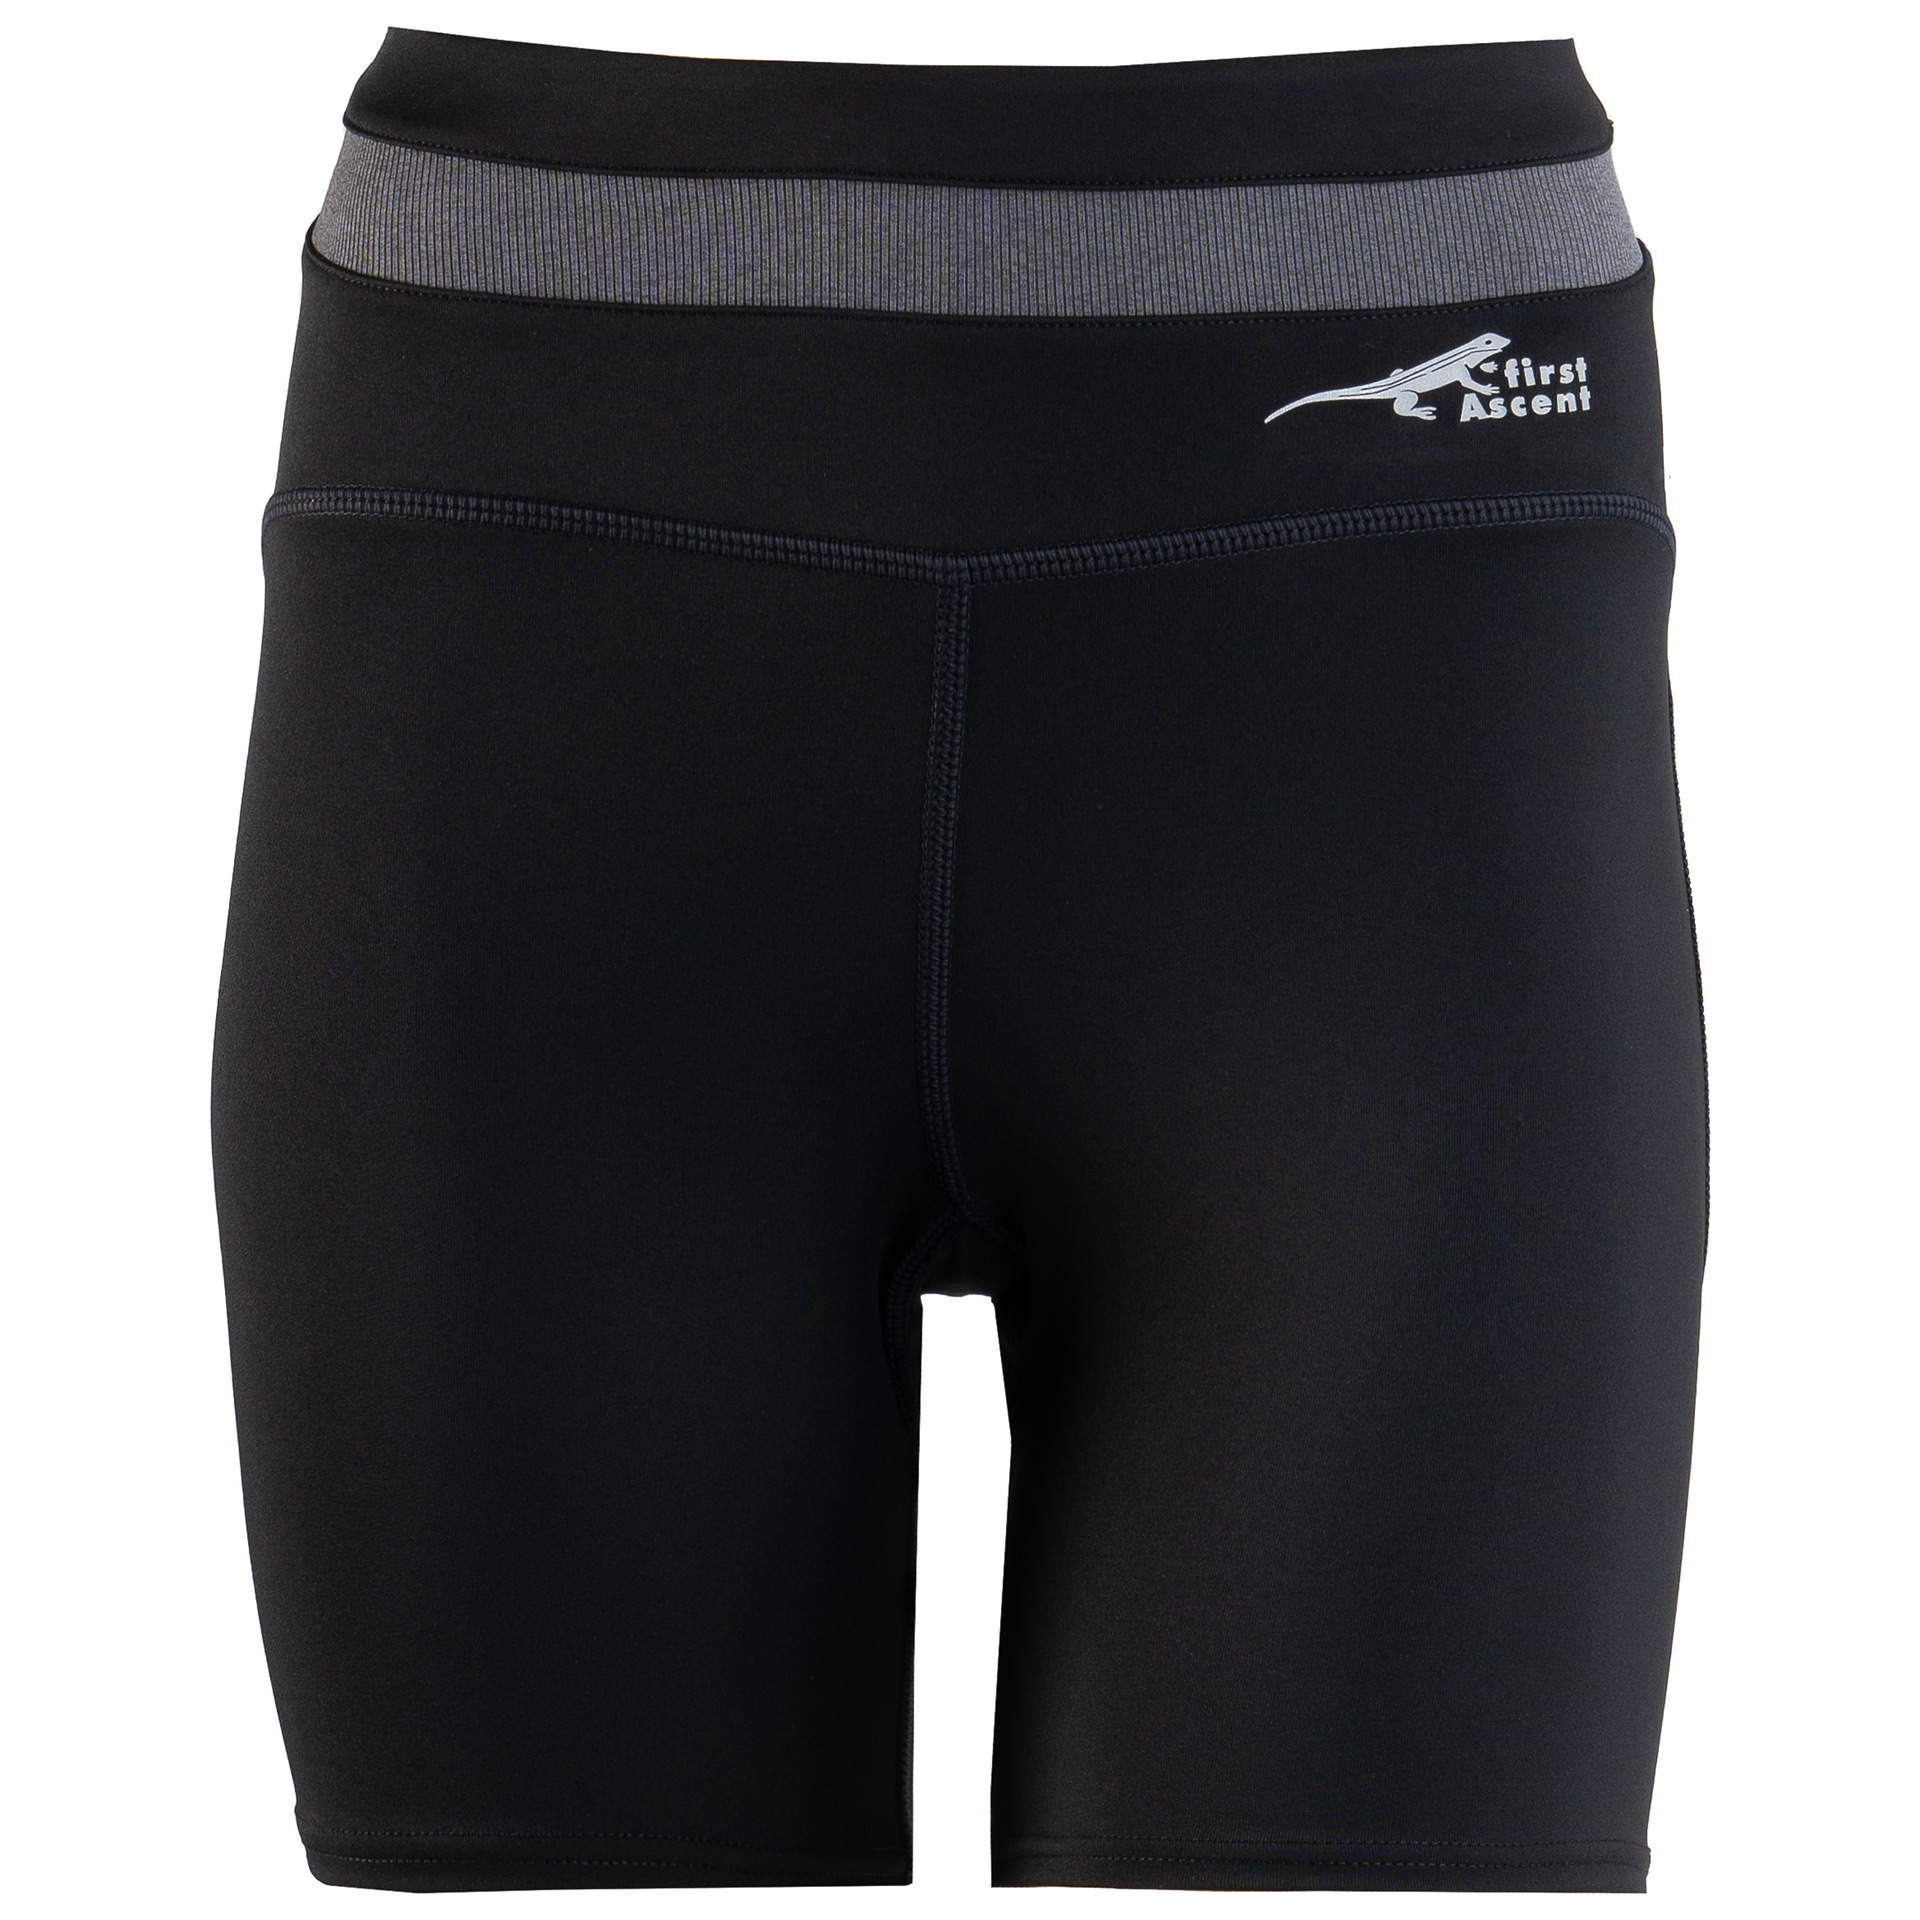 Ladies Pulse 5inch Short Tights - First Ascent